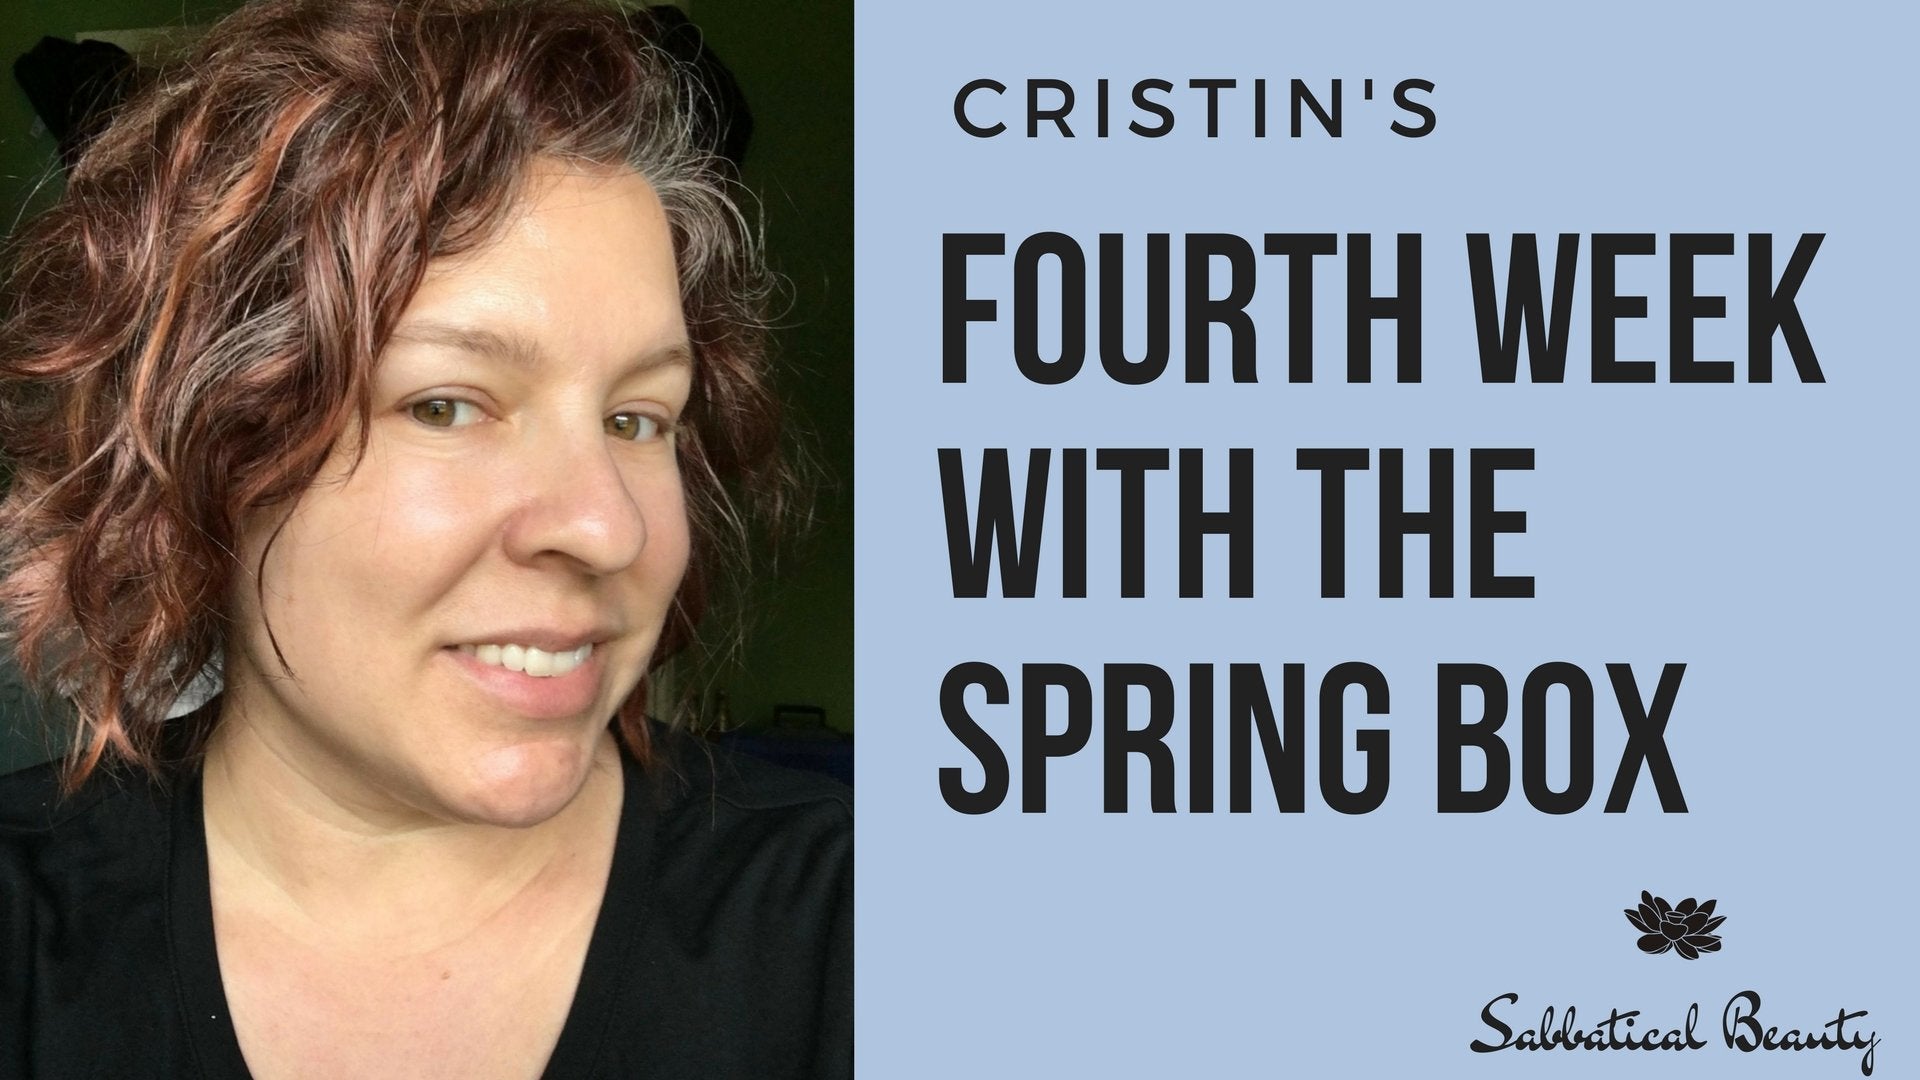 Cristin's Fourth Week With The Spring Box - Sabbatical Beauty